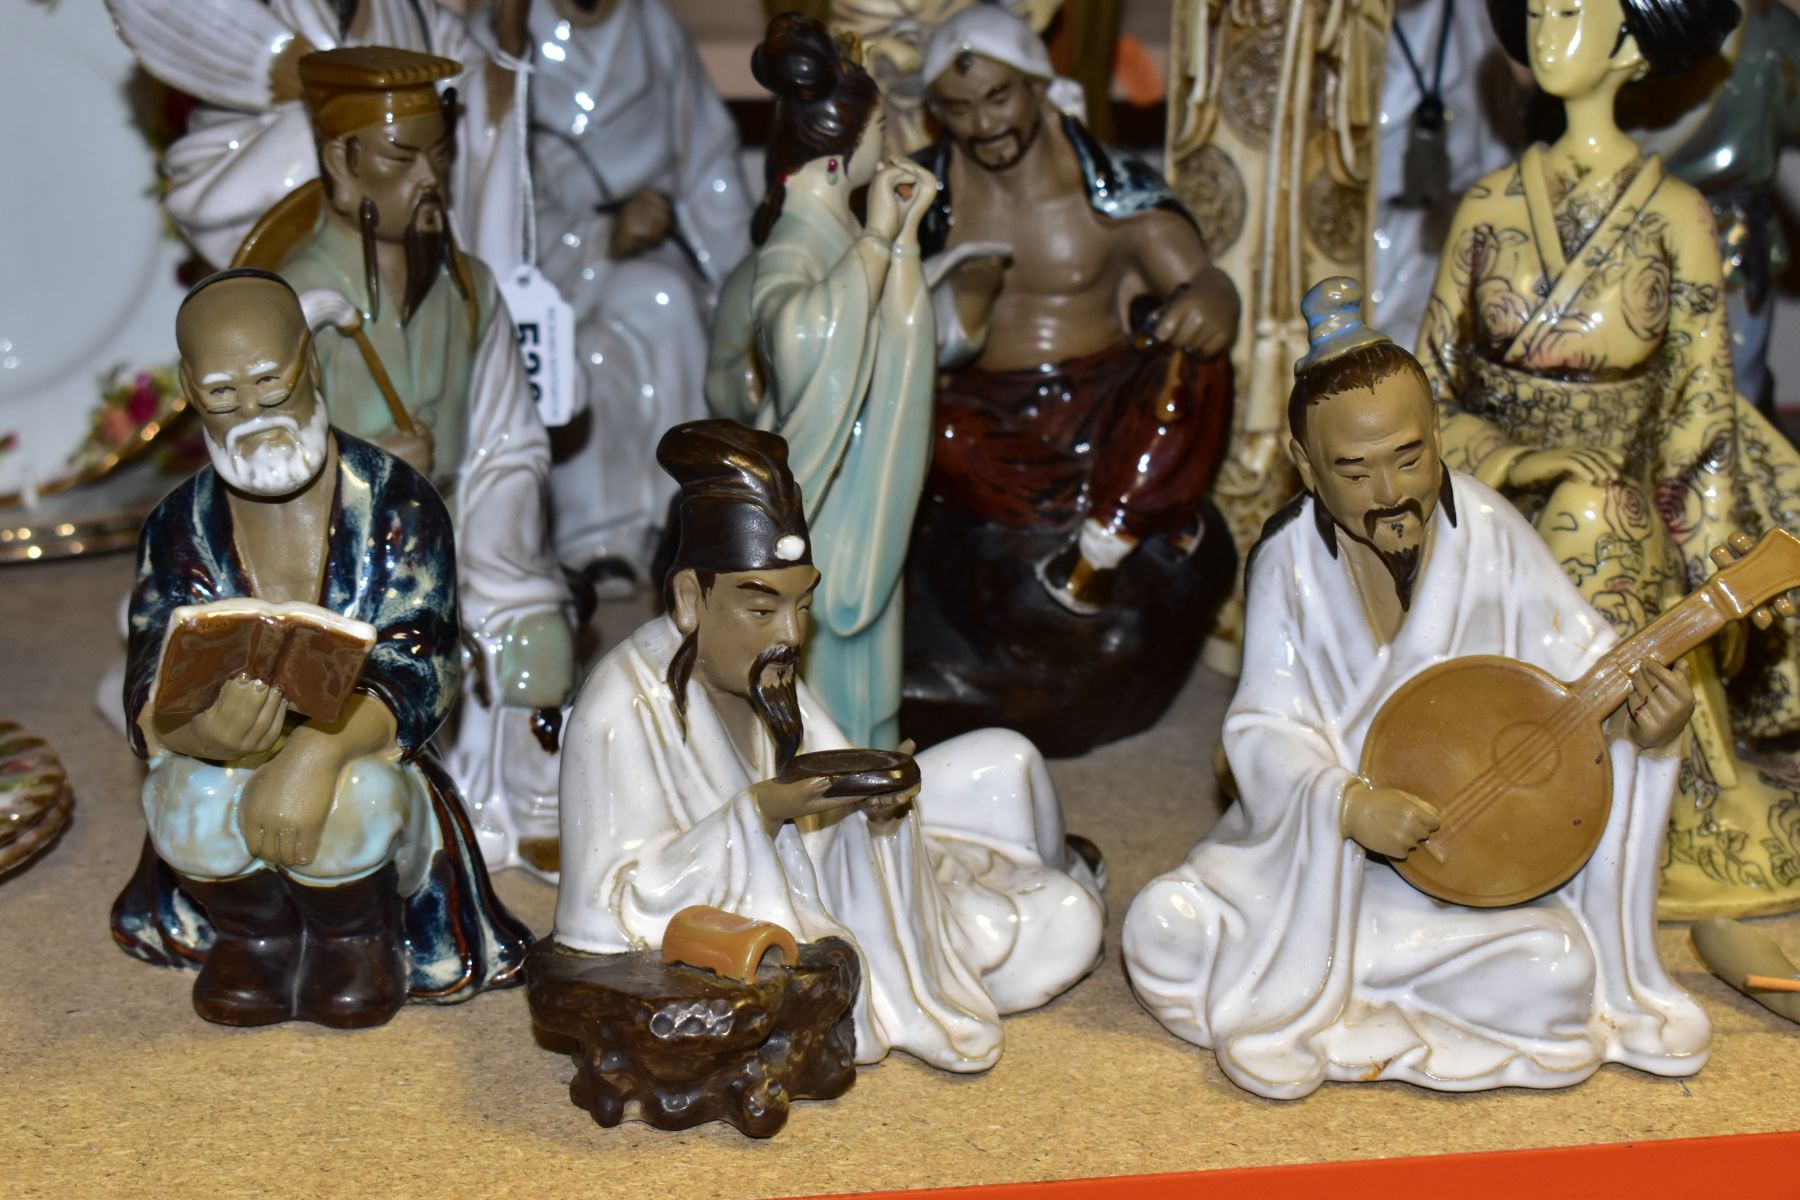 A GROUP OF MODERN ORIENTAL FIGURINES, to include fifteen figurines featuring people reading, fishing - Image 3 of 12